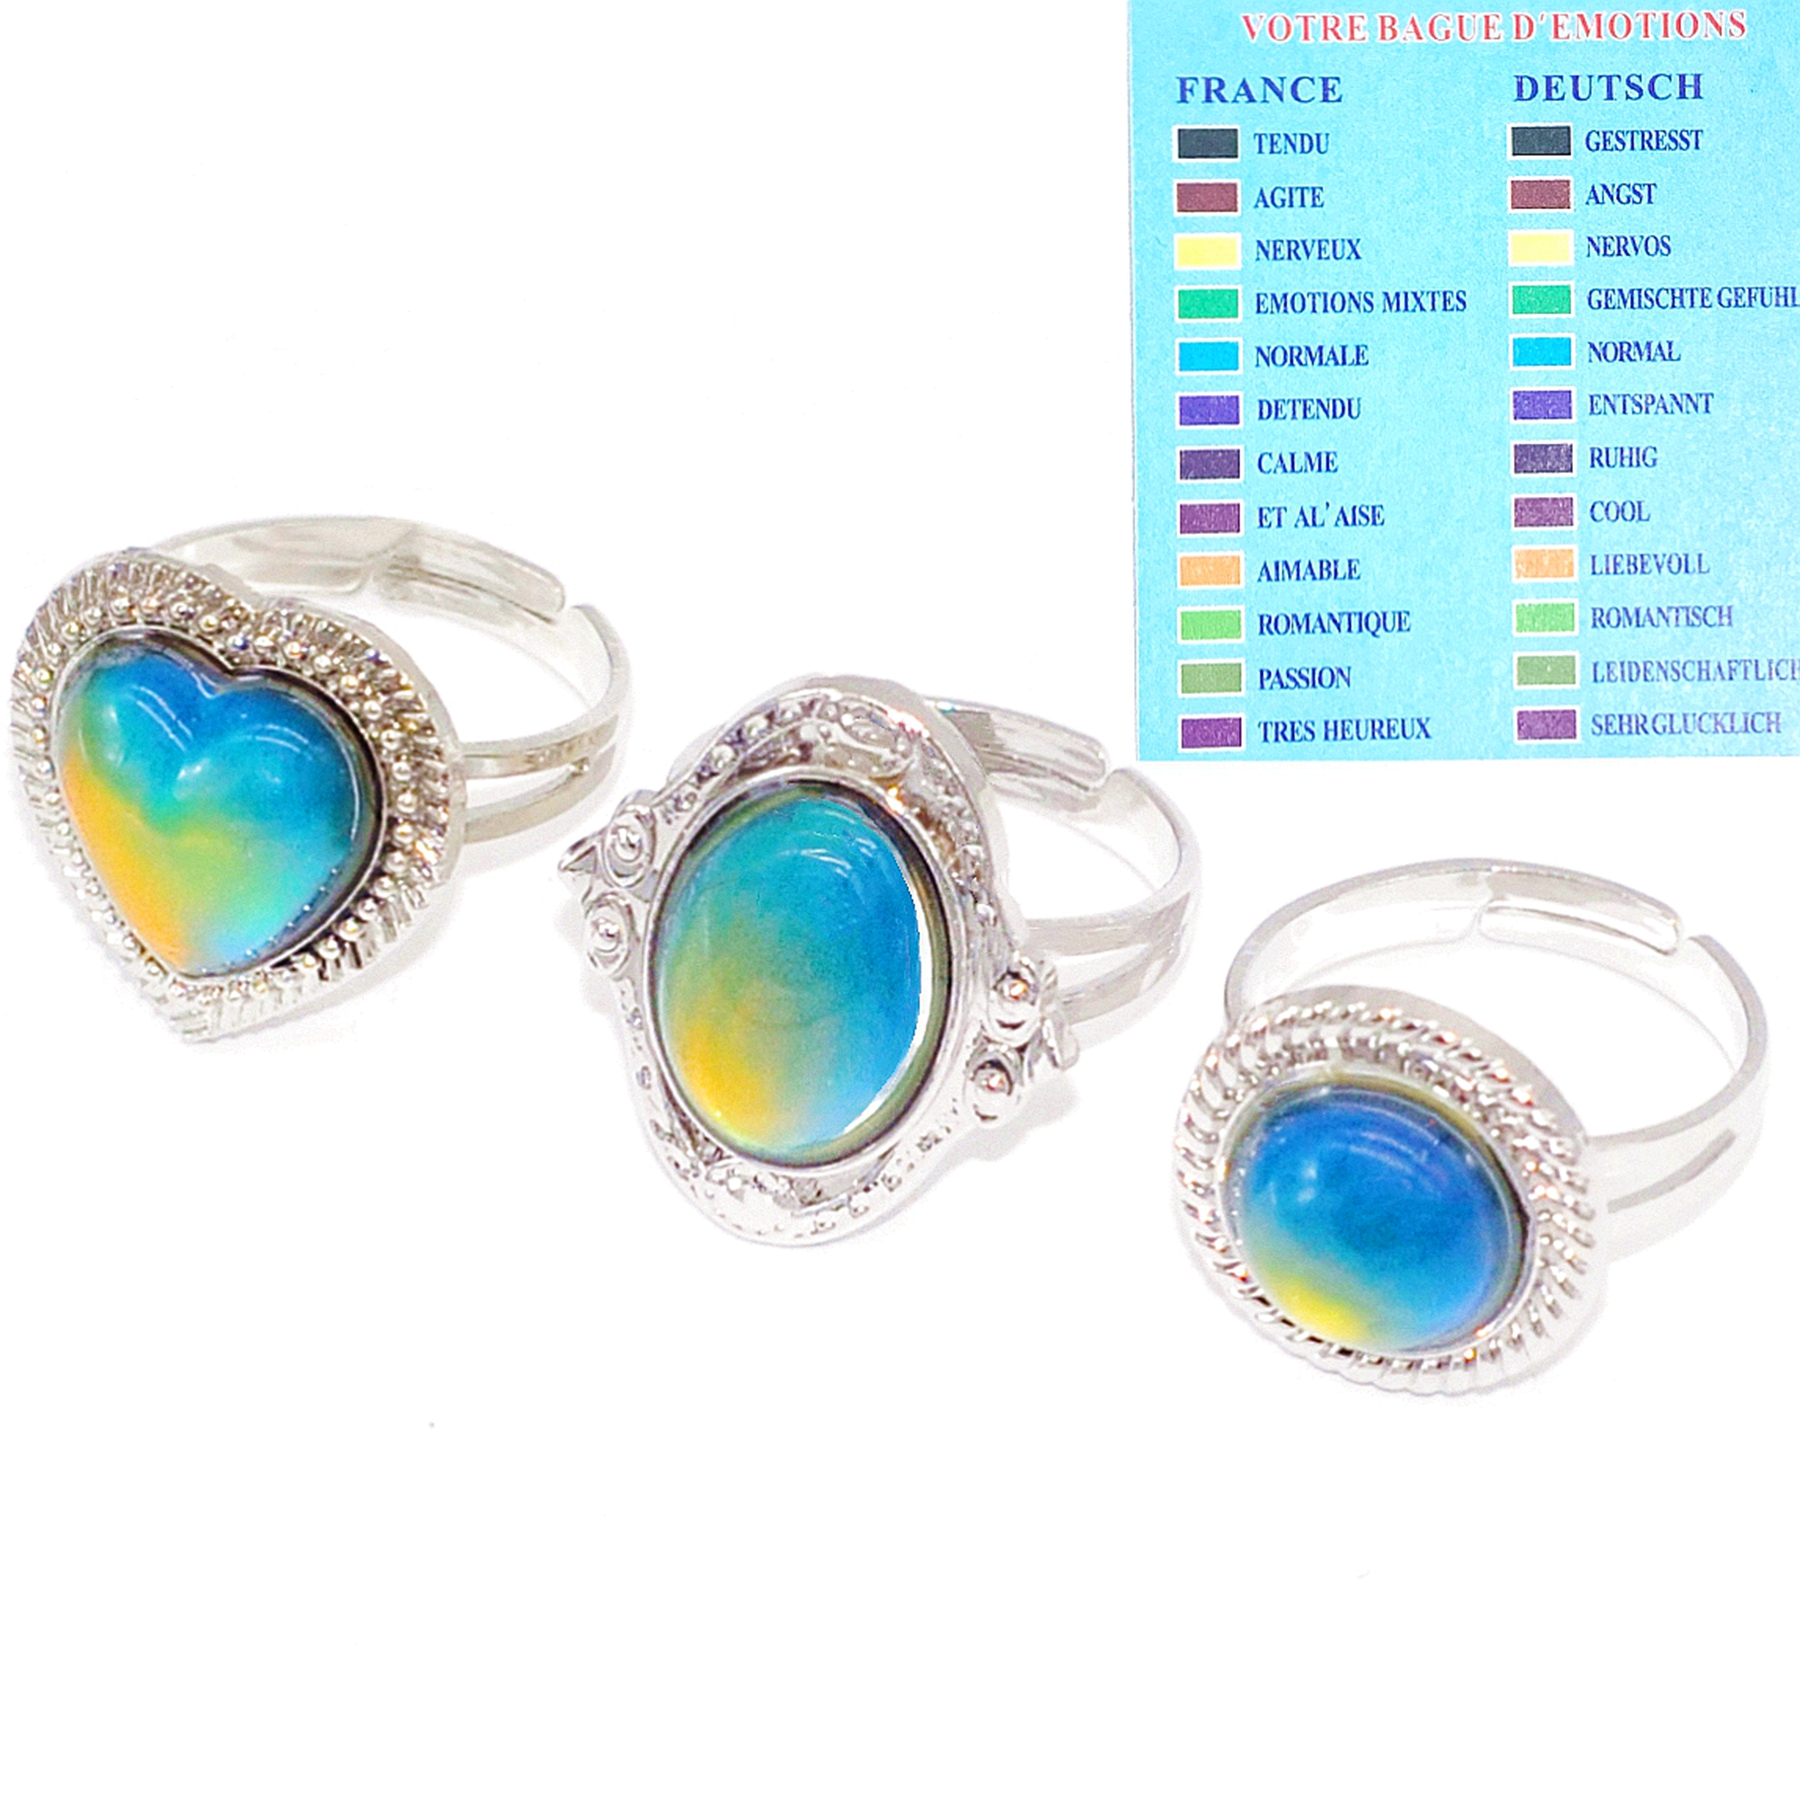 

Wholesale 30pcs Temperature Change Color Mood Rings Mixed Design Women Fashion Heart Ellipse Round Vintage Emotion Feeling Adjustable Party Gifts Jewelry